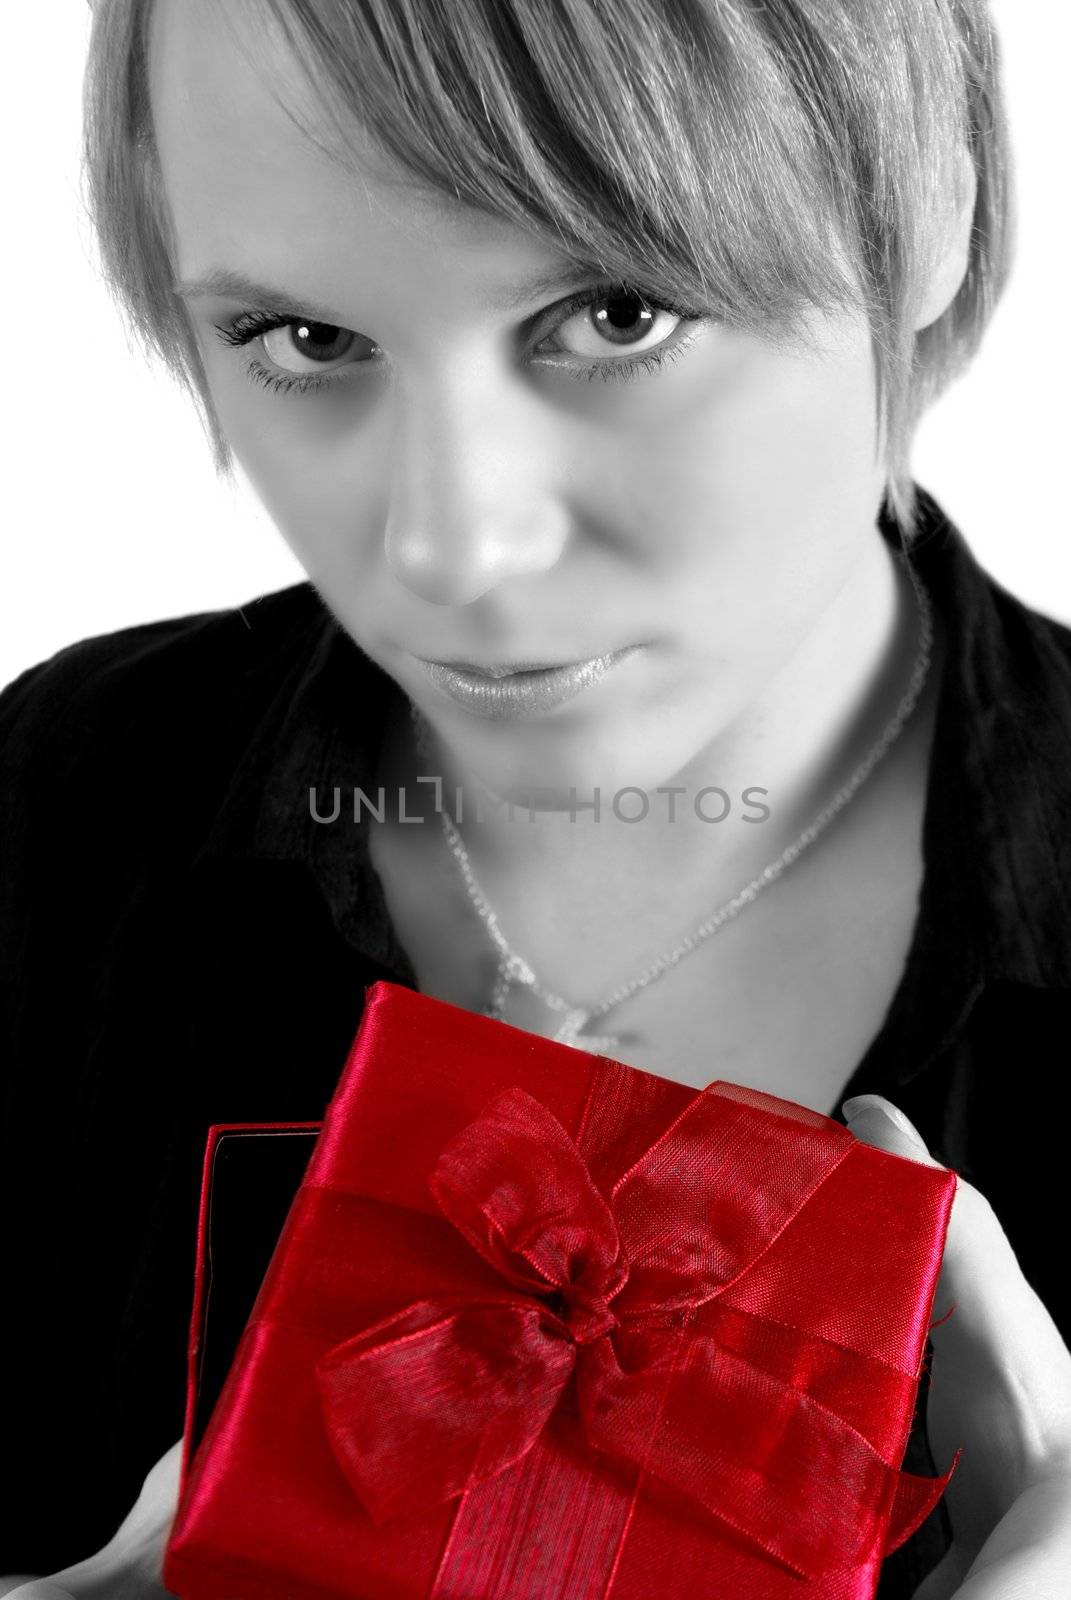 Black and white girl with red gift box